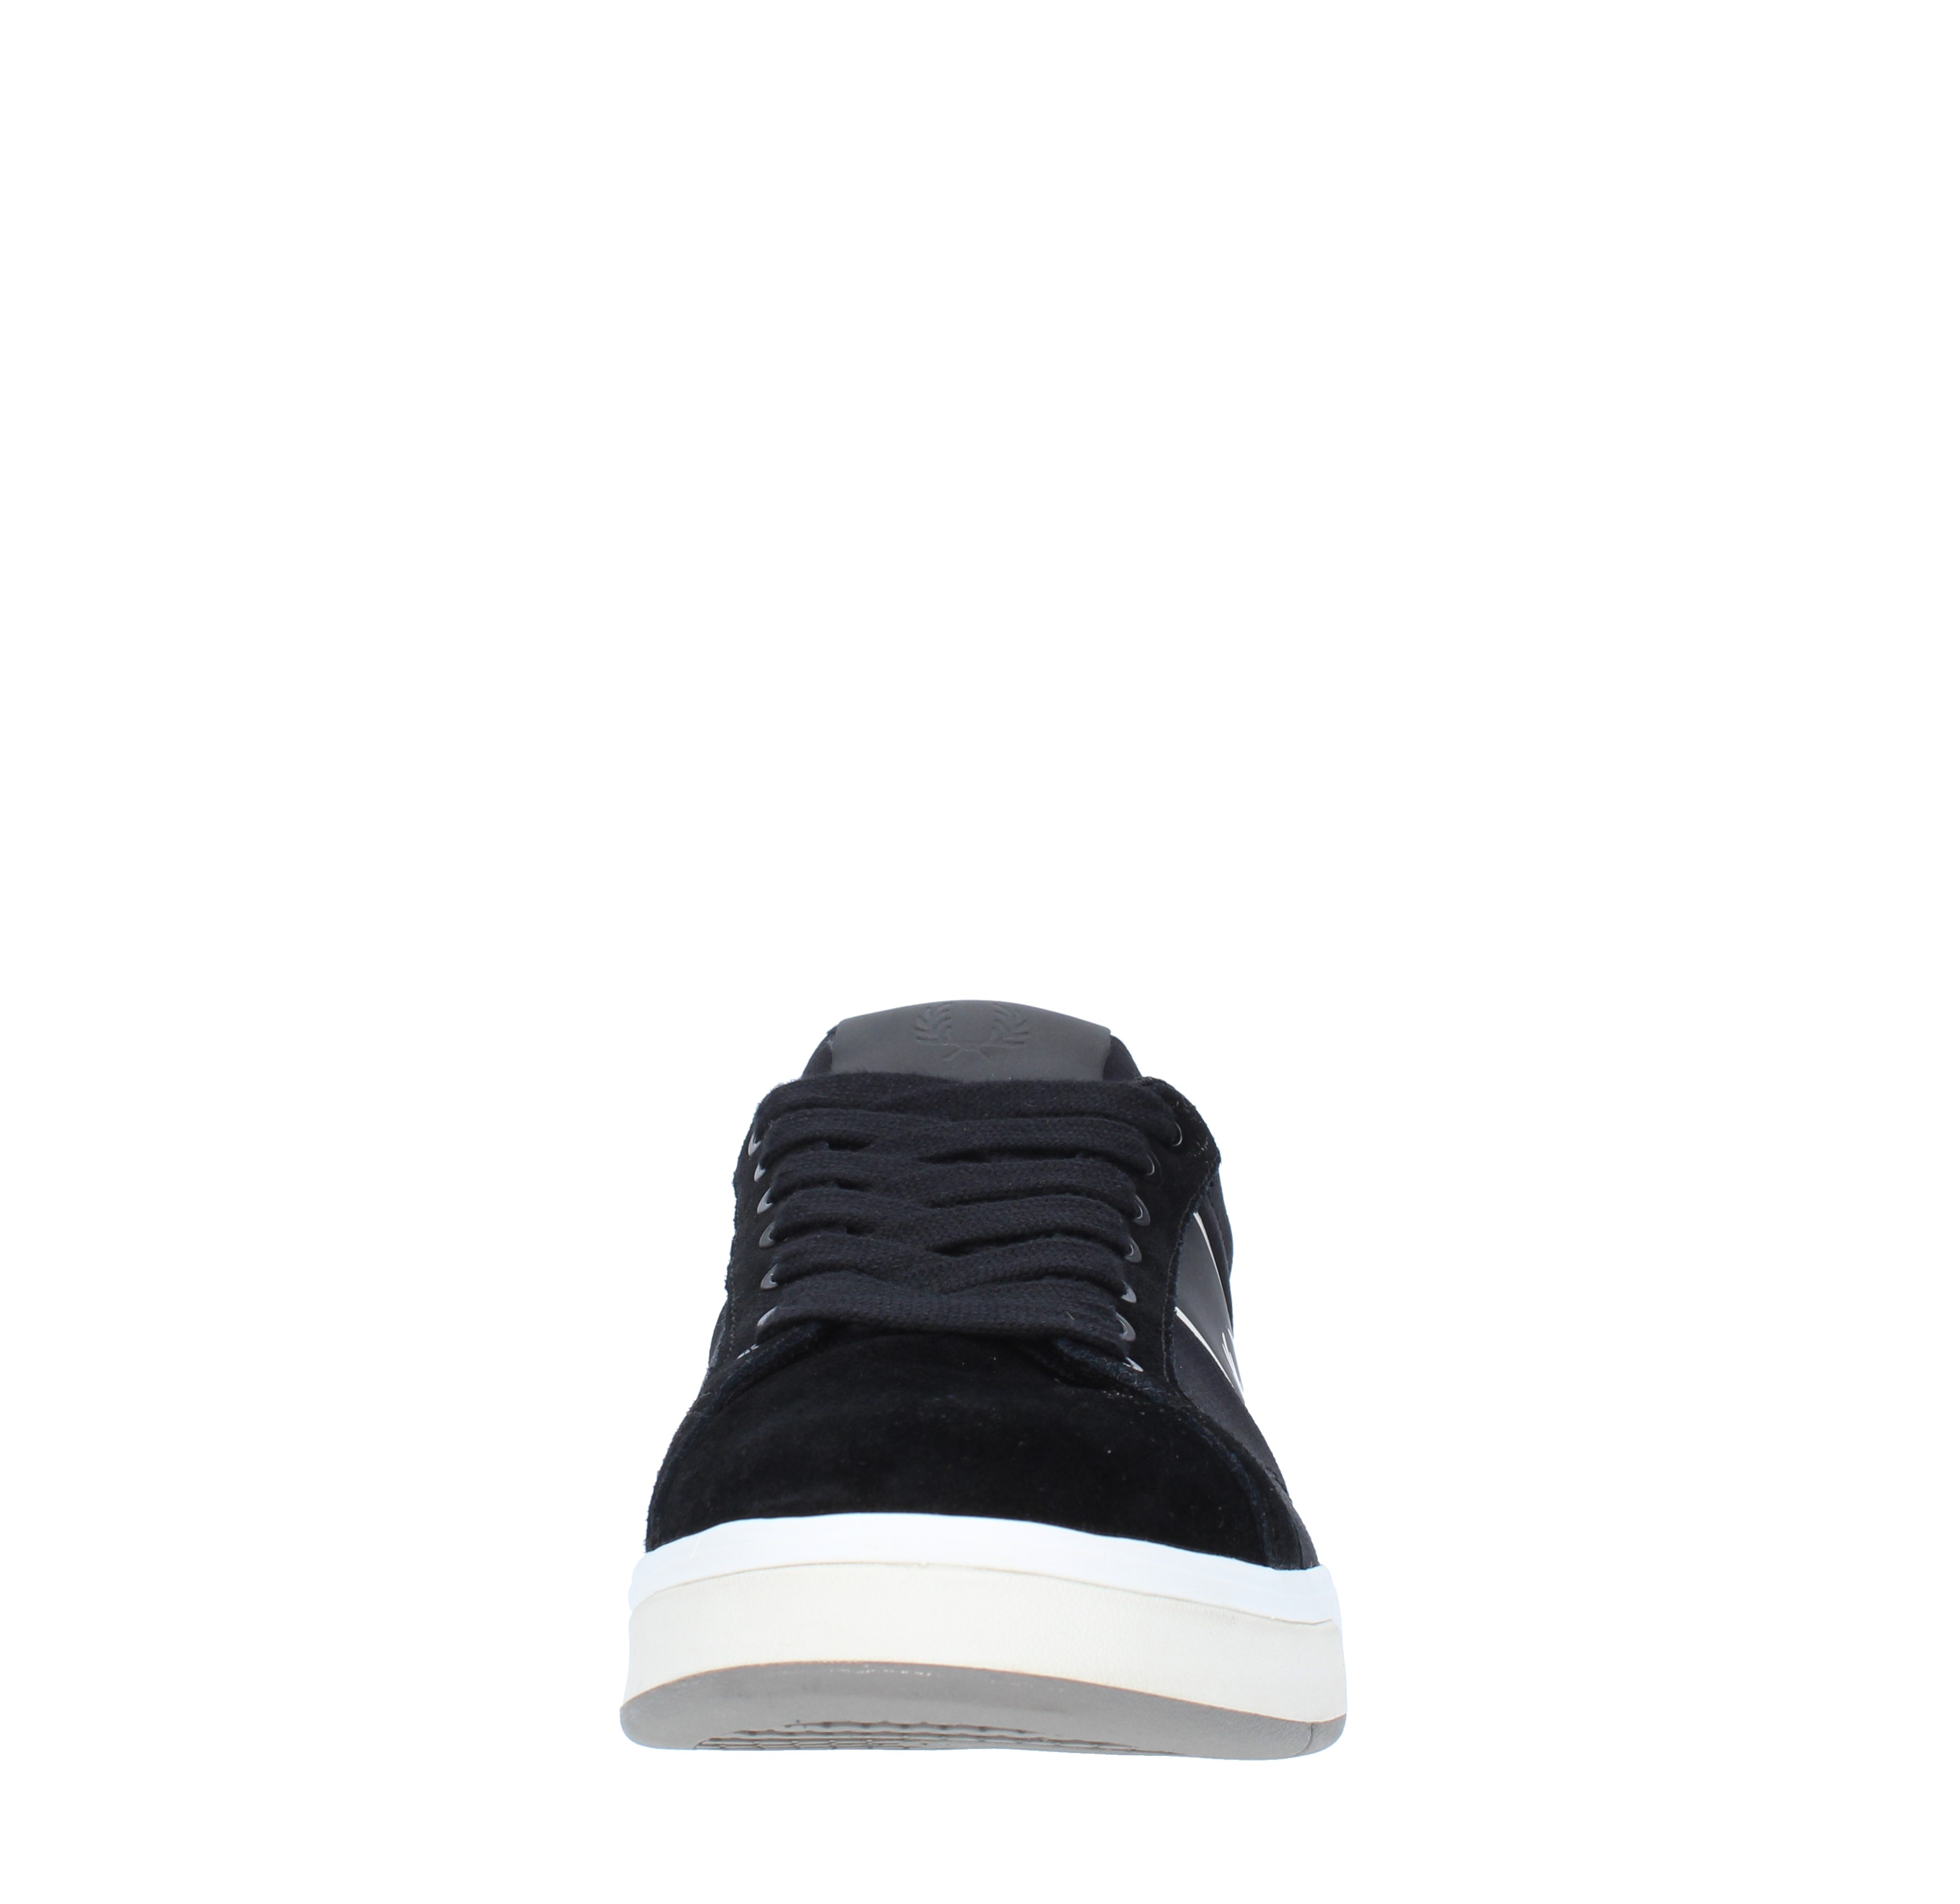 Sneakers in pelle e tessuto - FRED PERRY - Ginevra calzature